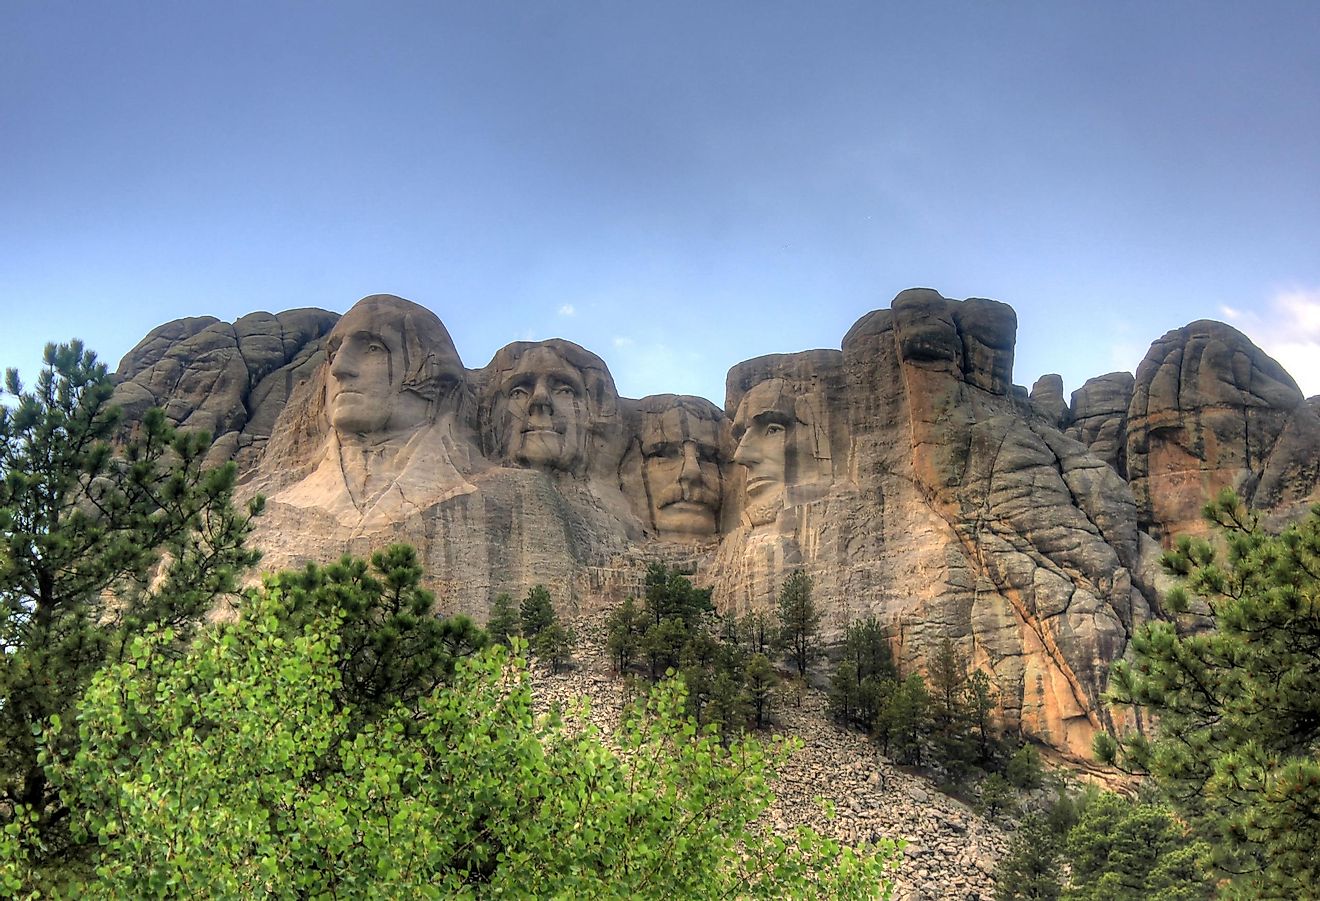 Mount Rushmore is part of the Black Hills Range, one of the oldest mountain ranges in the world. Image credit: www.goodfreephotos.com